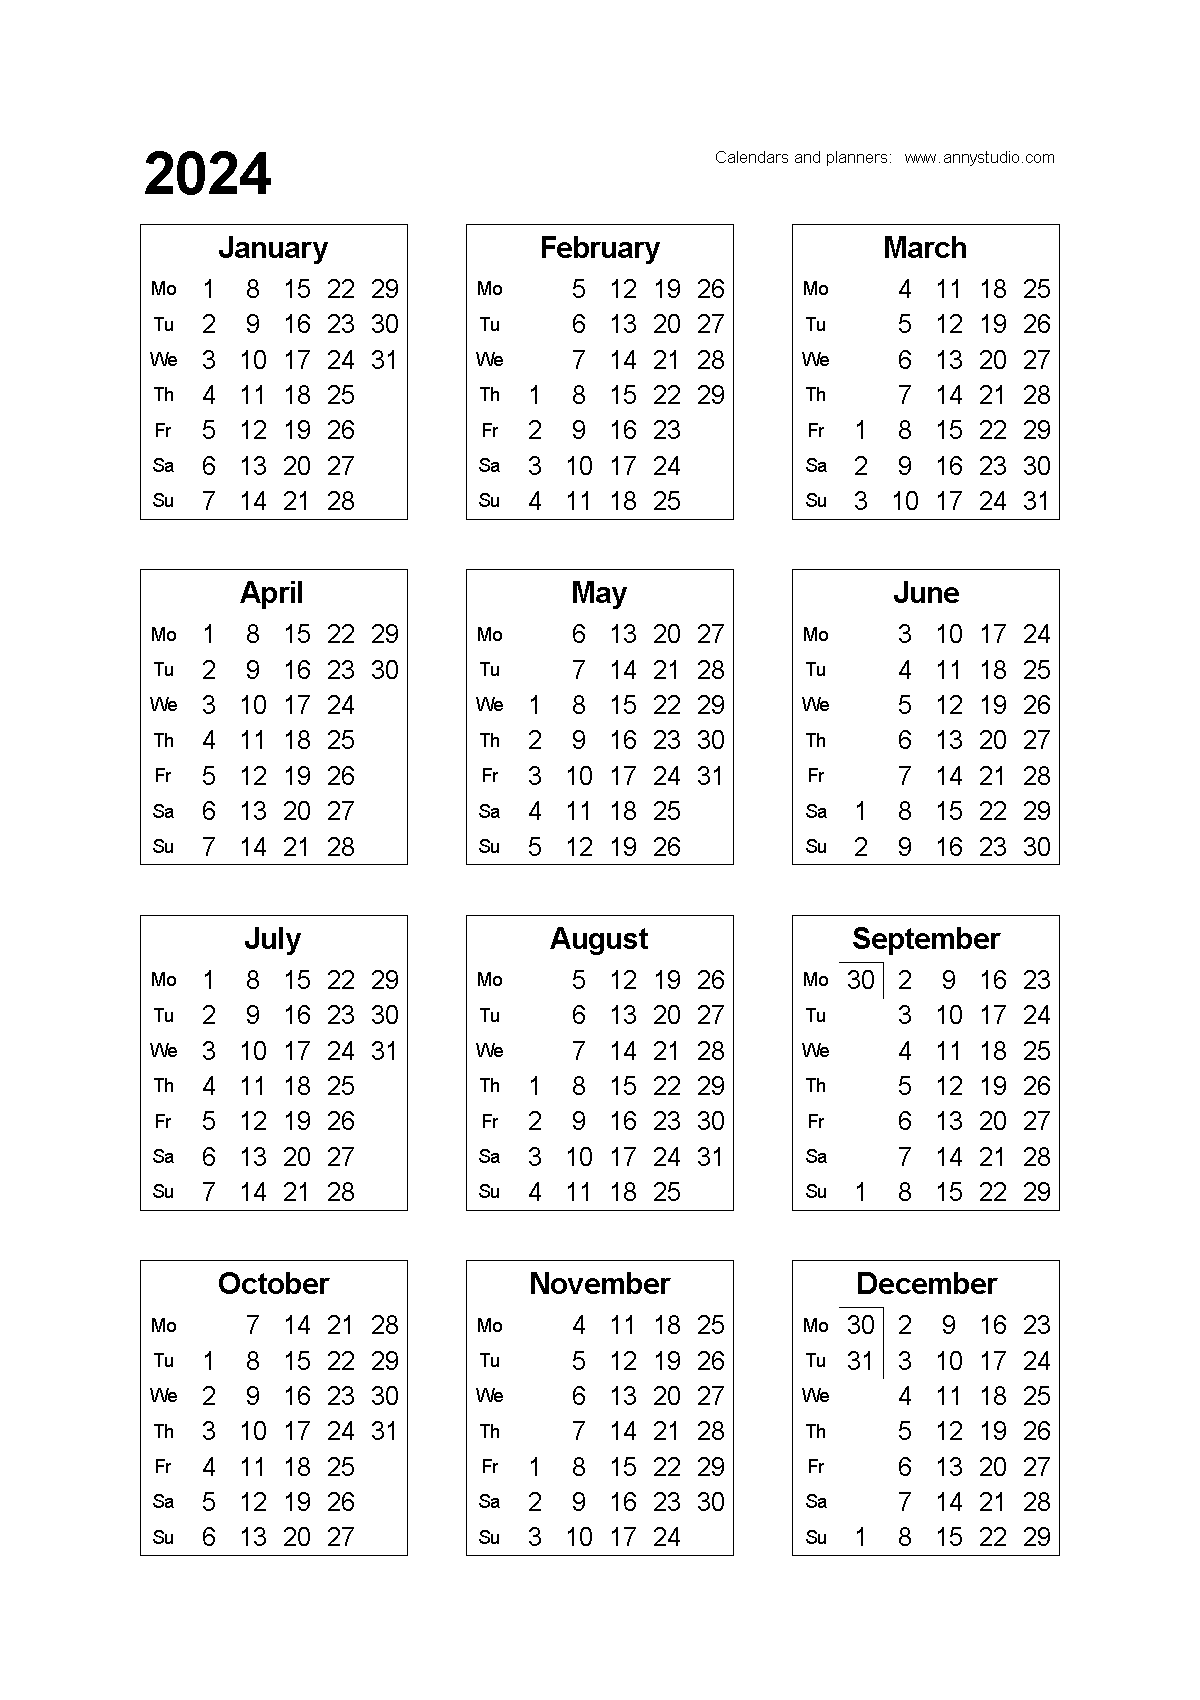 Free Printable Calendars And Planners 2024, 2025 And 2026 in Free Printable Calendar 2024 Australia